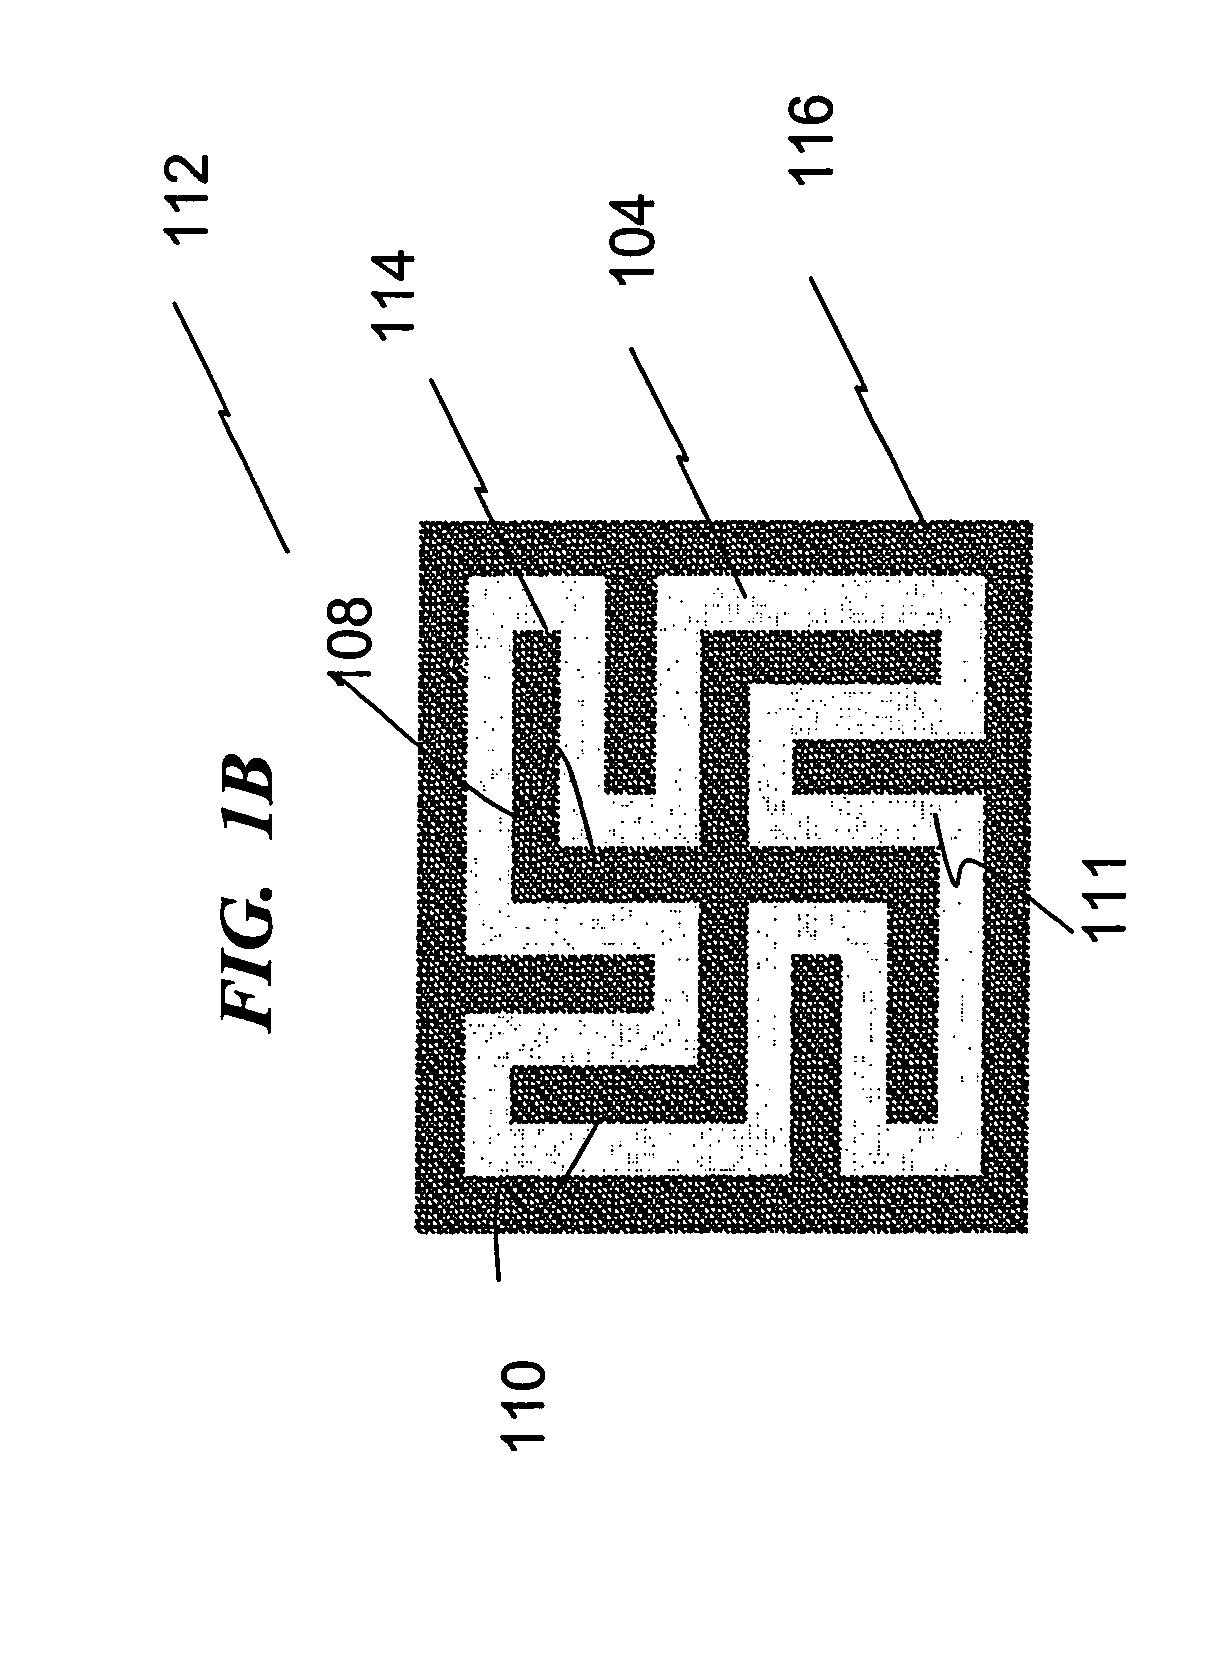 Metal-over-metal devices and the method for manufacturing same